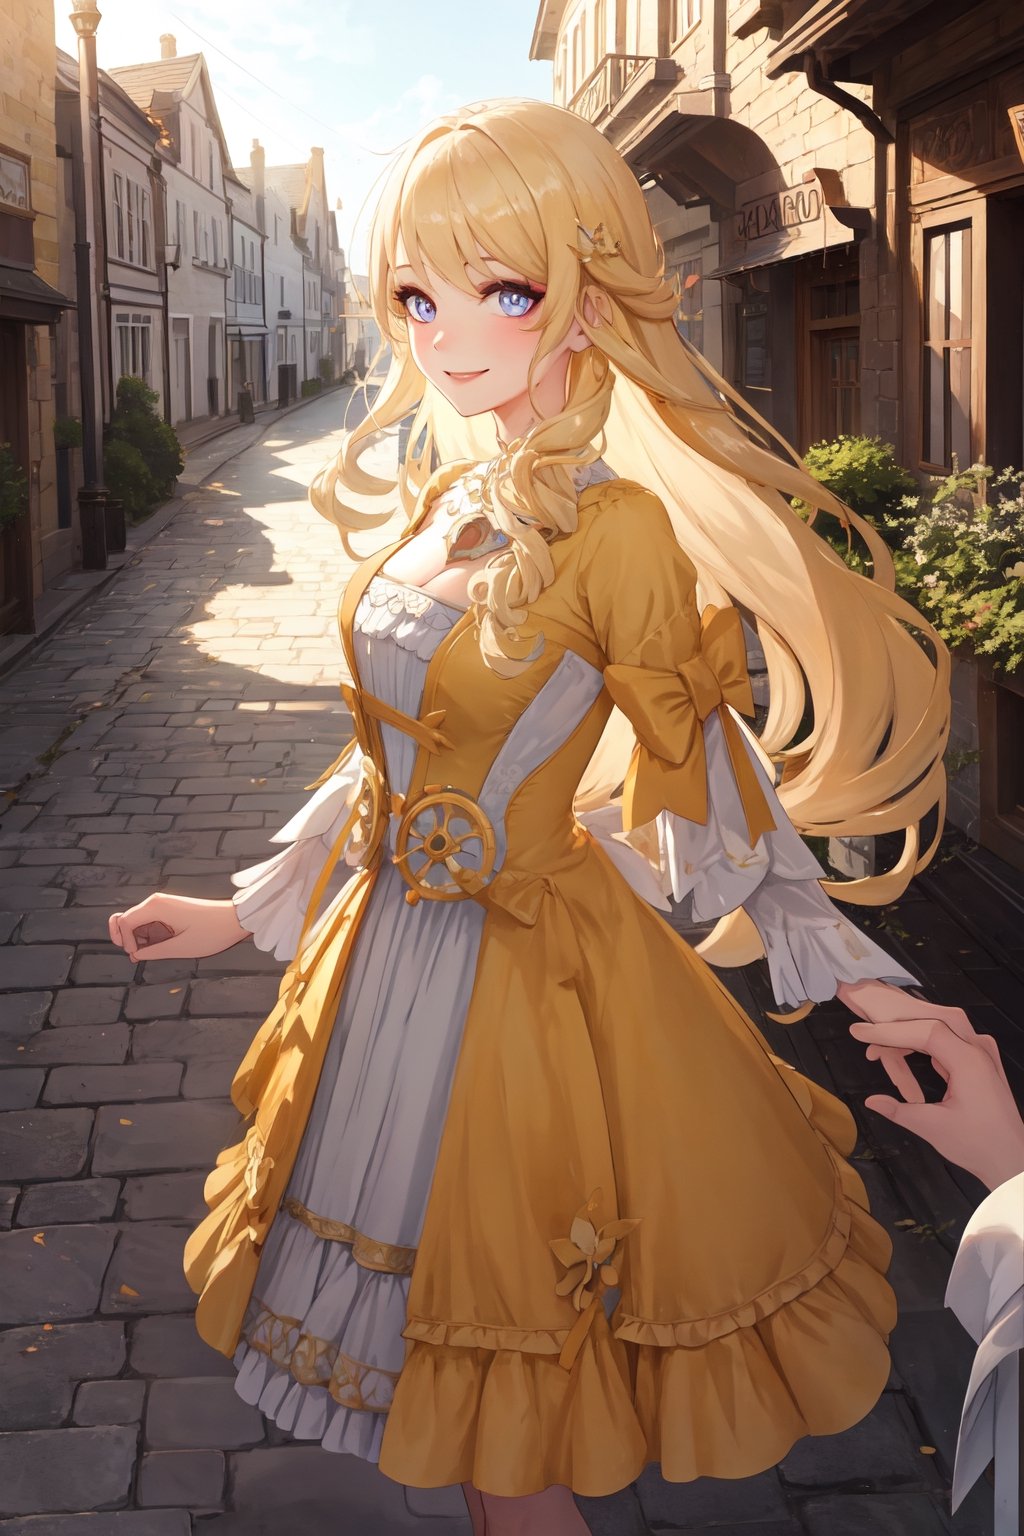 picturesque,aesthetic,1girl,solo,best quality, looking at viewer,masterpiece,expressive eyes, perfect face,complex, dramatic lighting, rim lighting,NaviaGenshin,very long hair,thick hair,alternate costume,victorian yellow dress, puffy dress, holding viewer's hand,pov,one step forward, smile, european town, cobble street, 